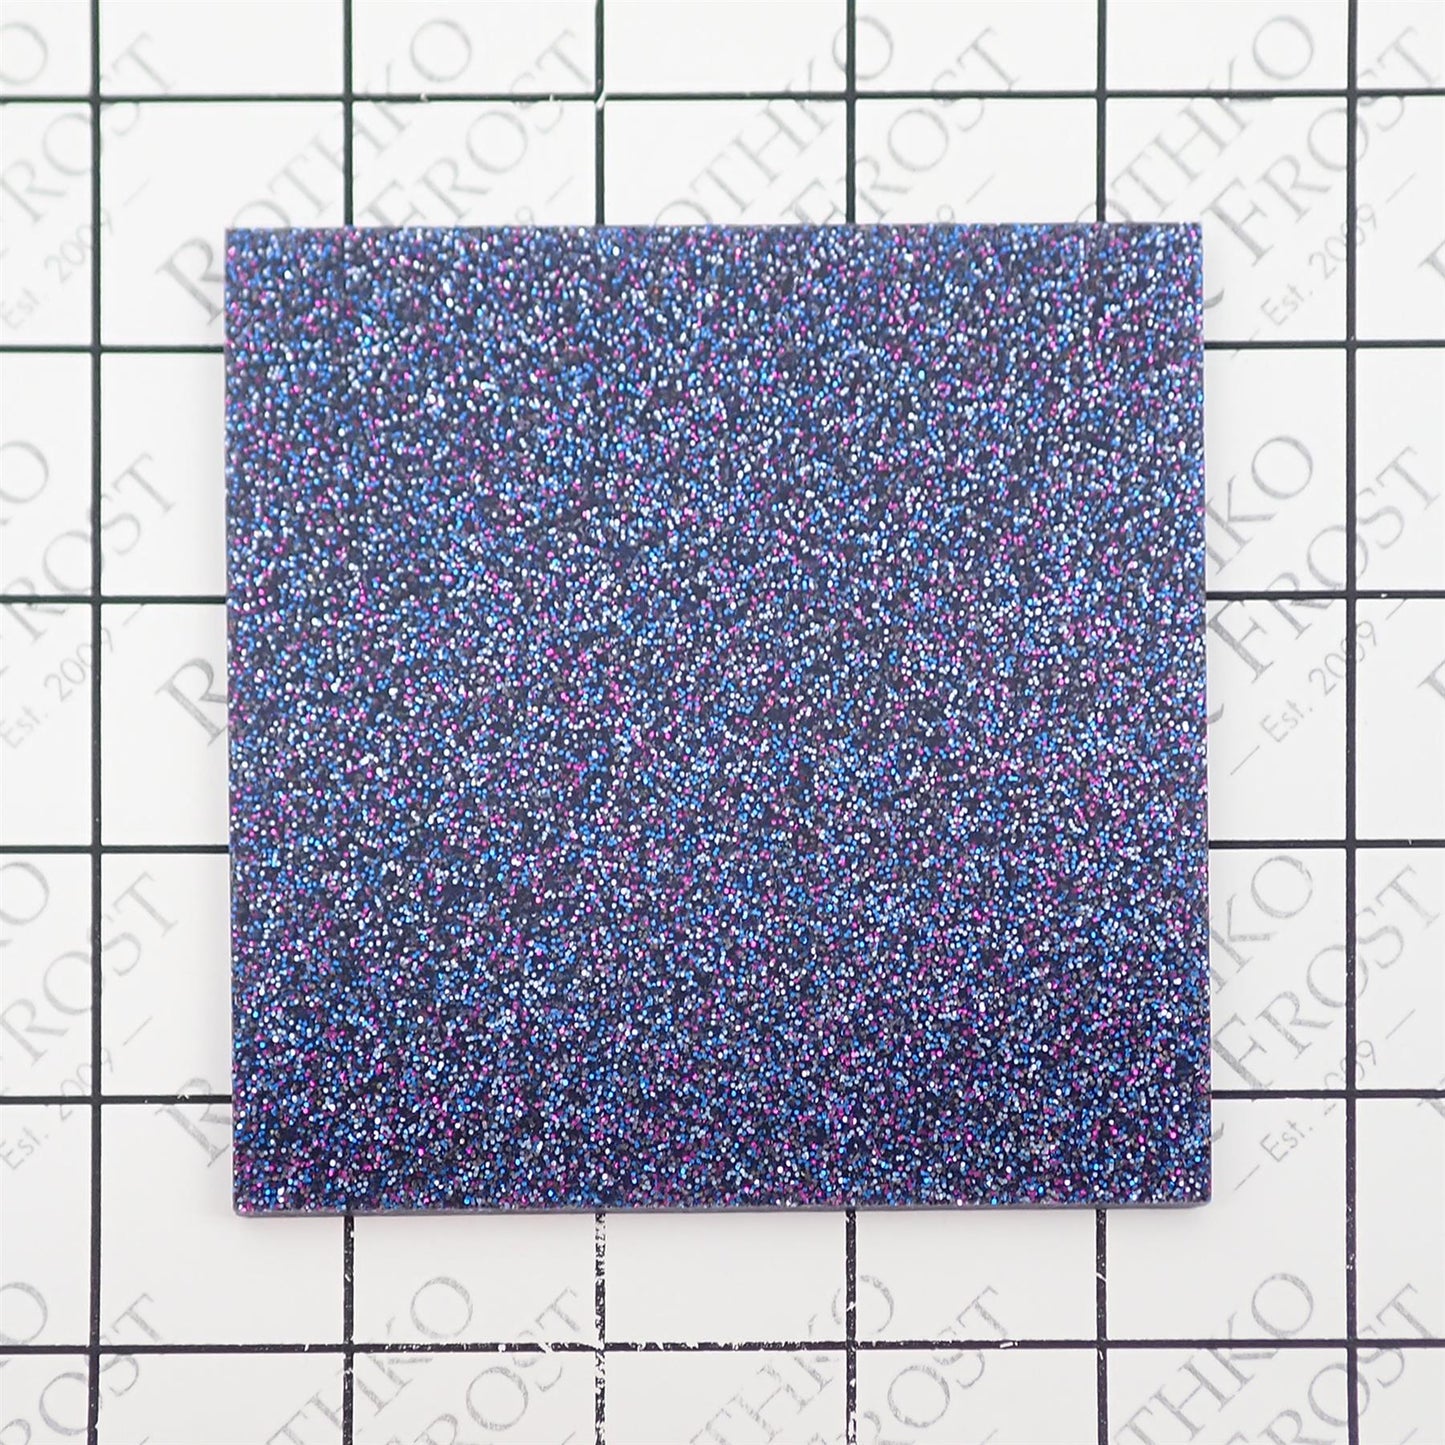 Incudo Blue 2-Sided Holographic Glitter Acrylic Sheet - 300x200x3mm (11.8x7.87x0.12")